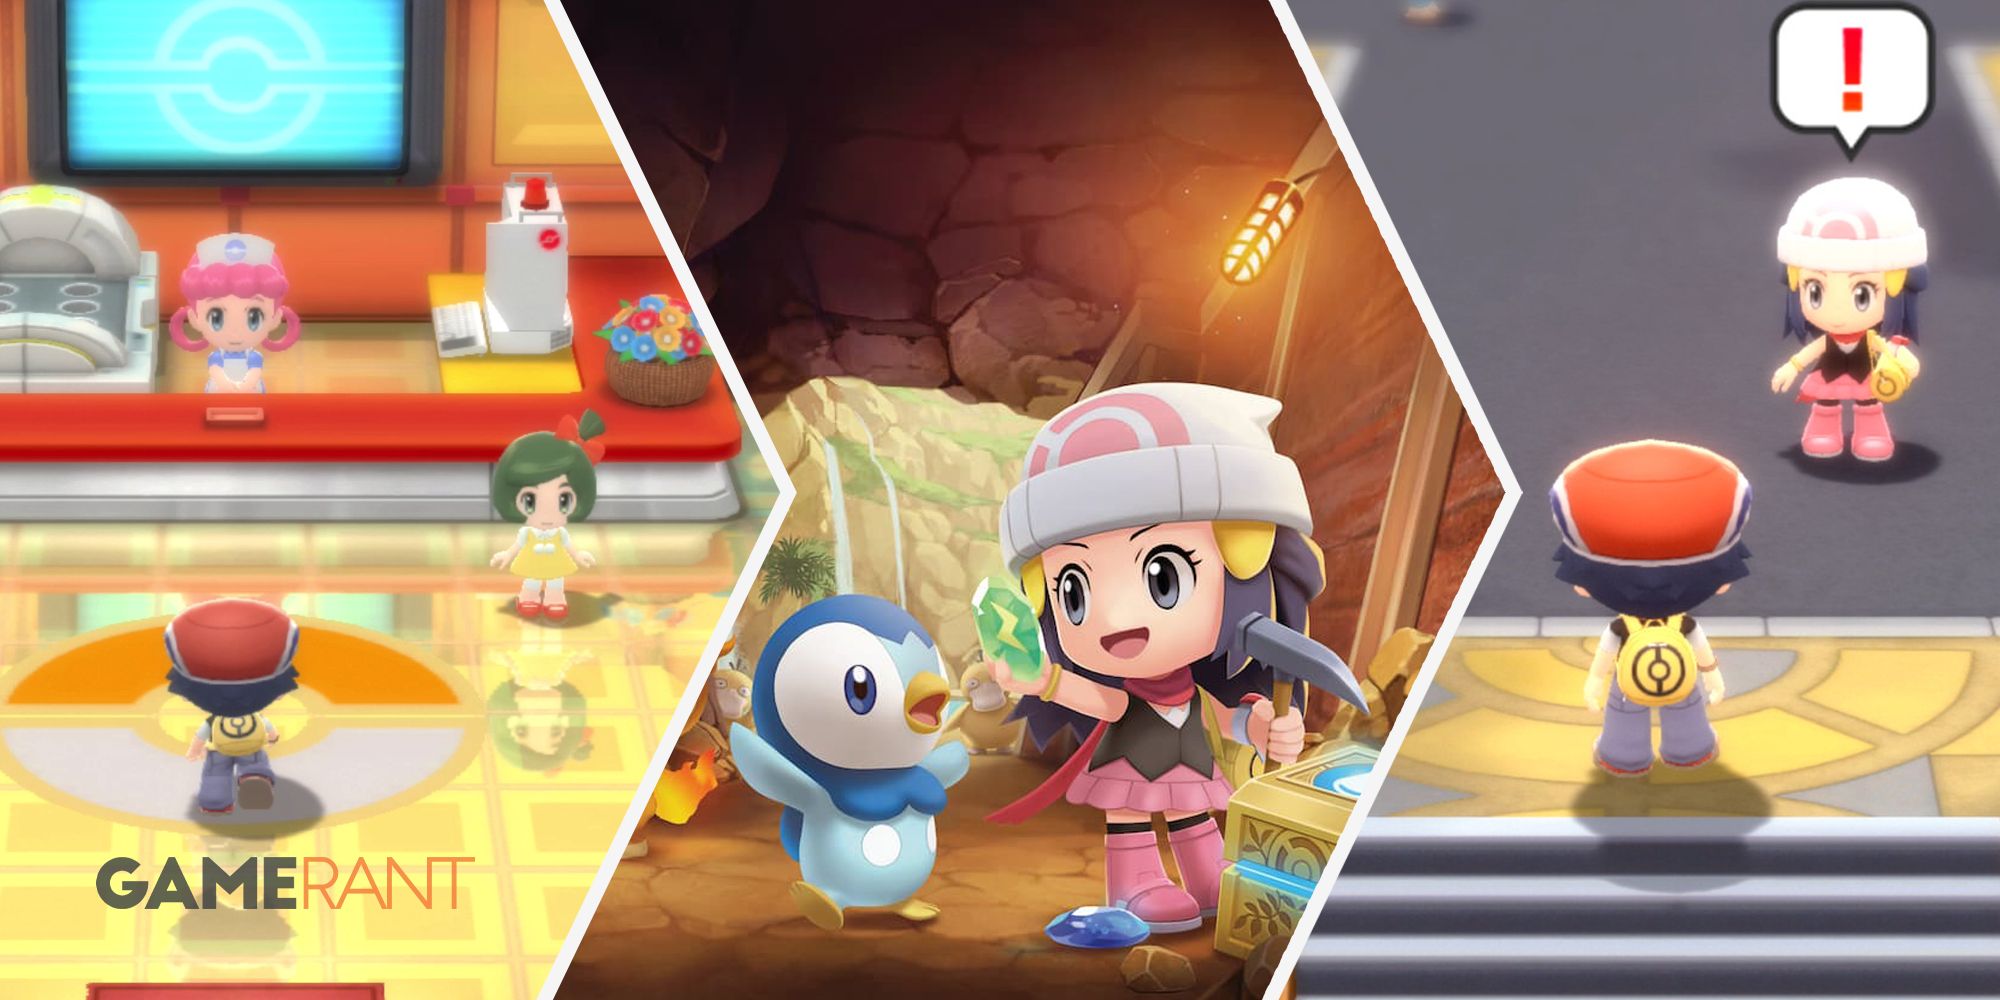 Player visits a Pokemon Center on left, player in a cave with Piplup in middle, player gets the attention of an NPC on right